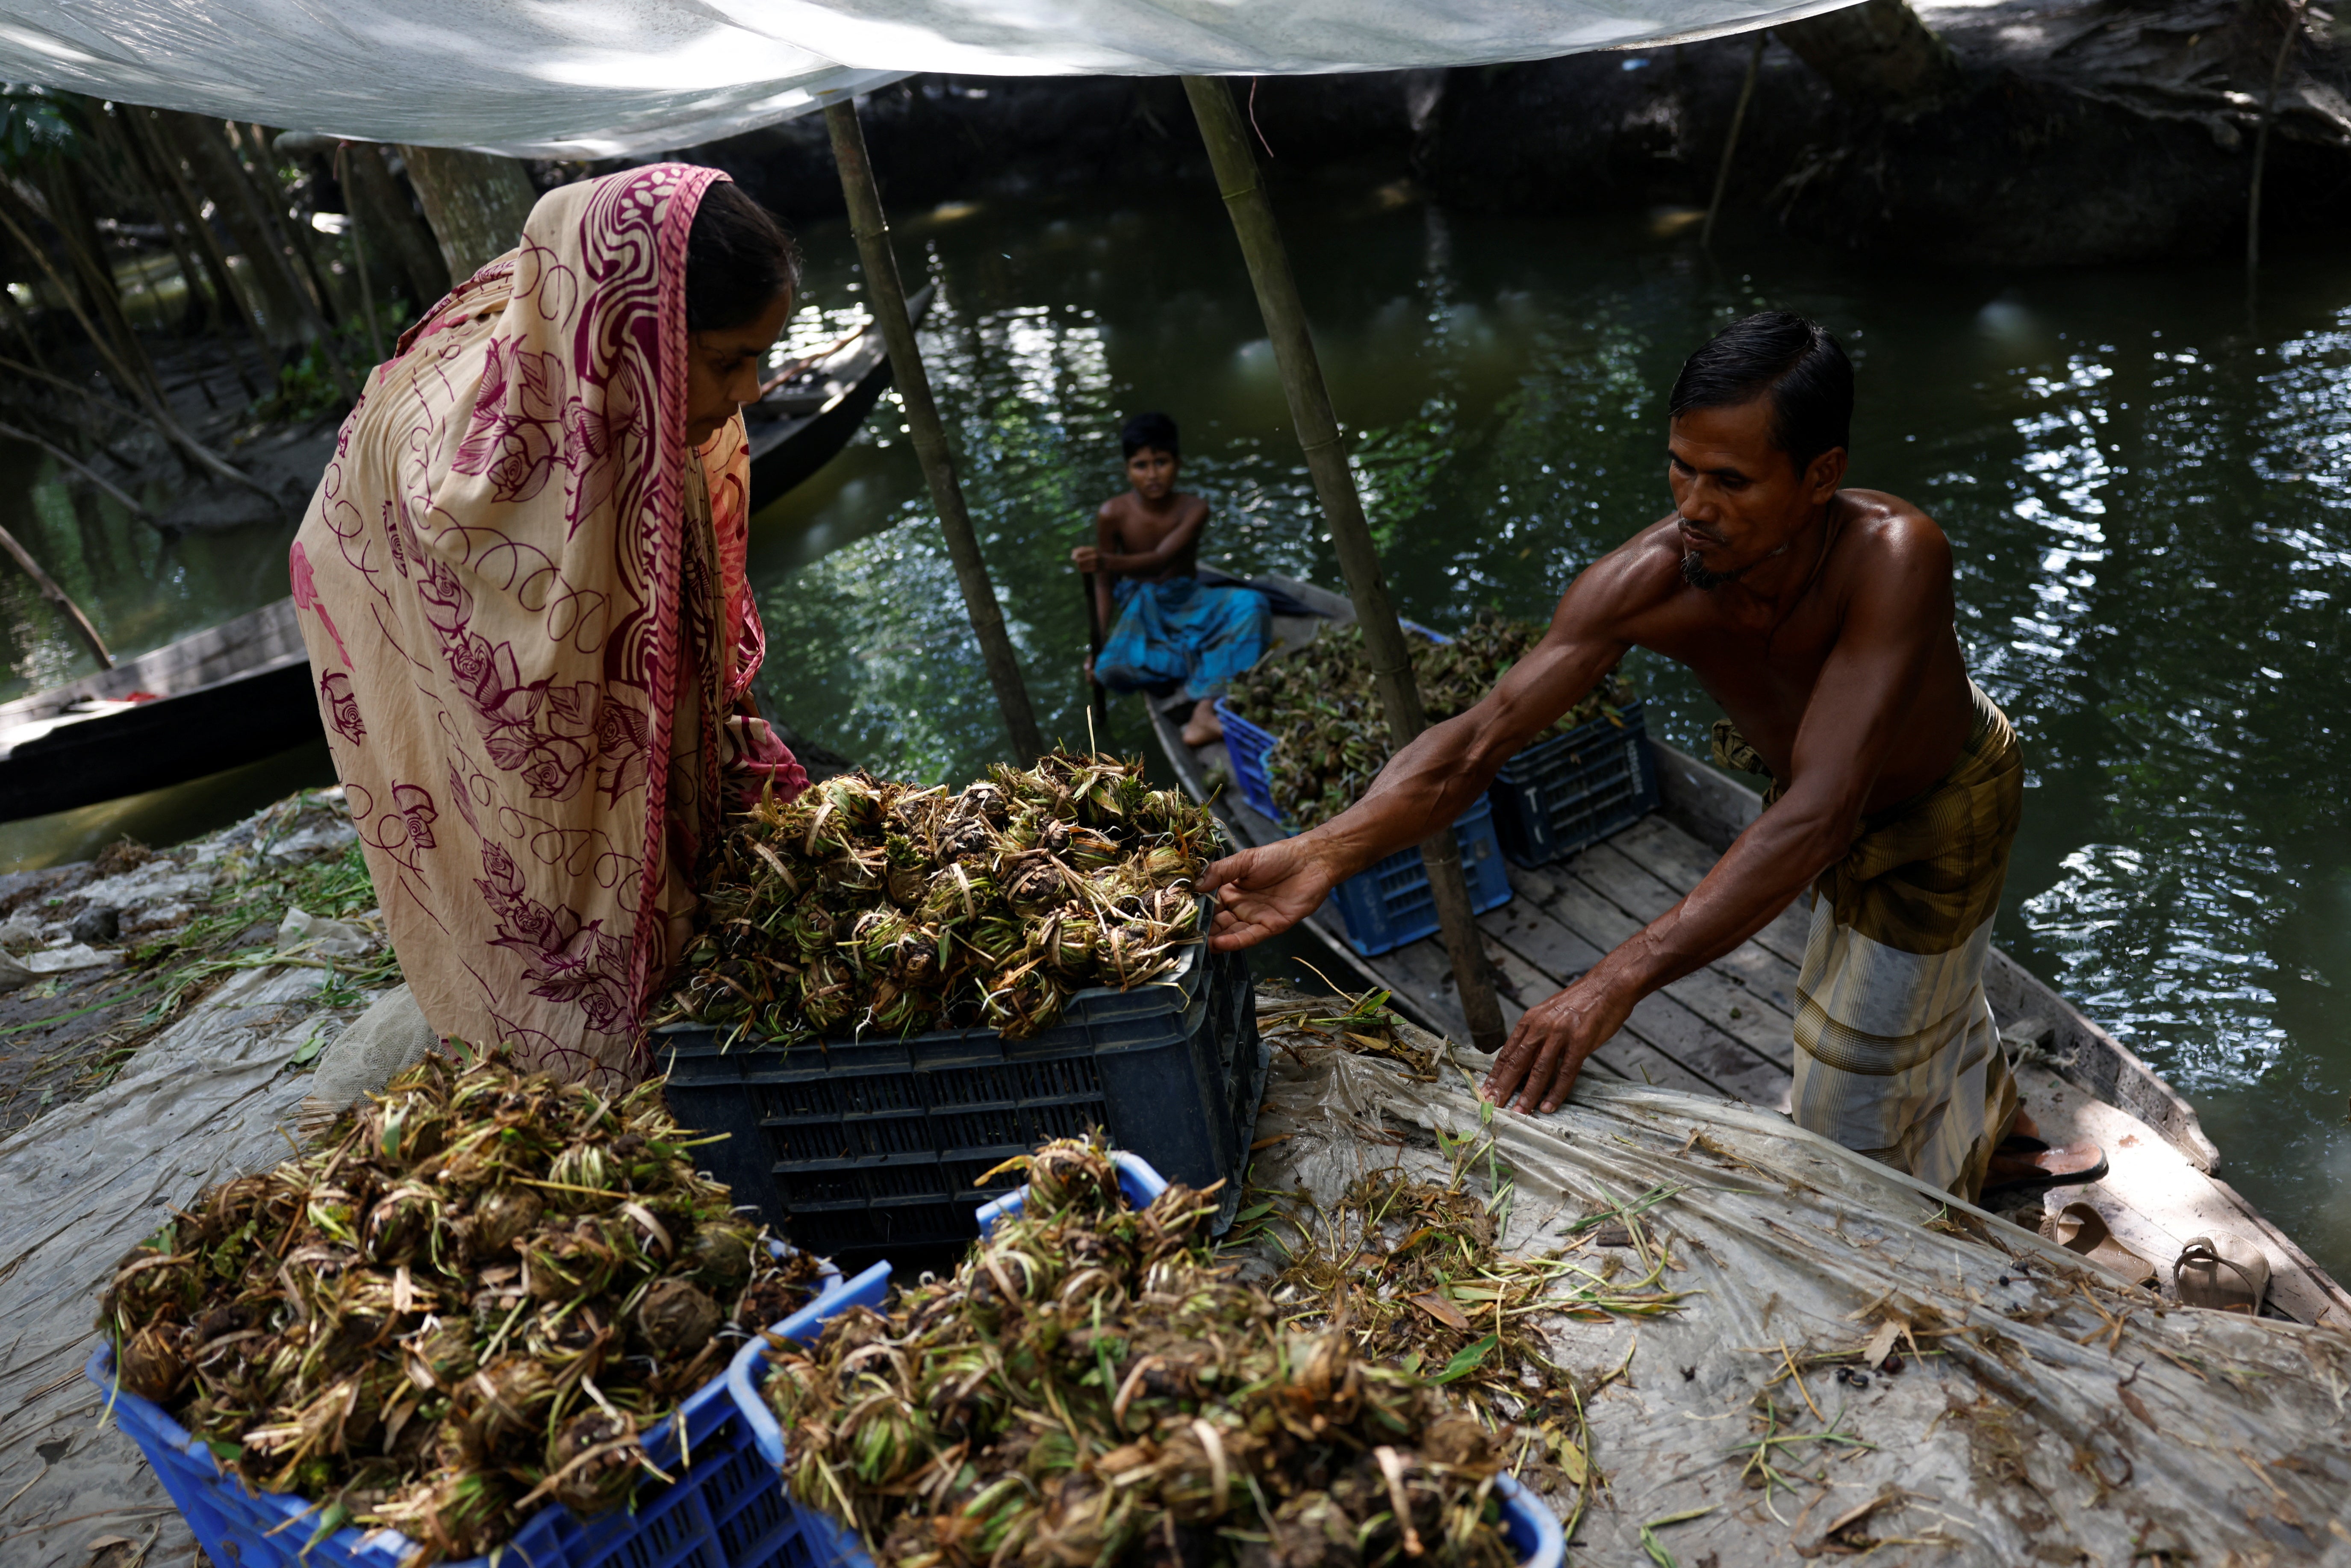 Mohammad and his wife Murshida Begum, 35, load seedling balls onto a boat to be planted on their floating farm